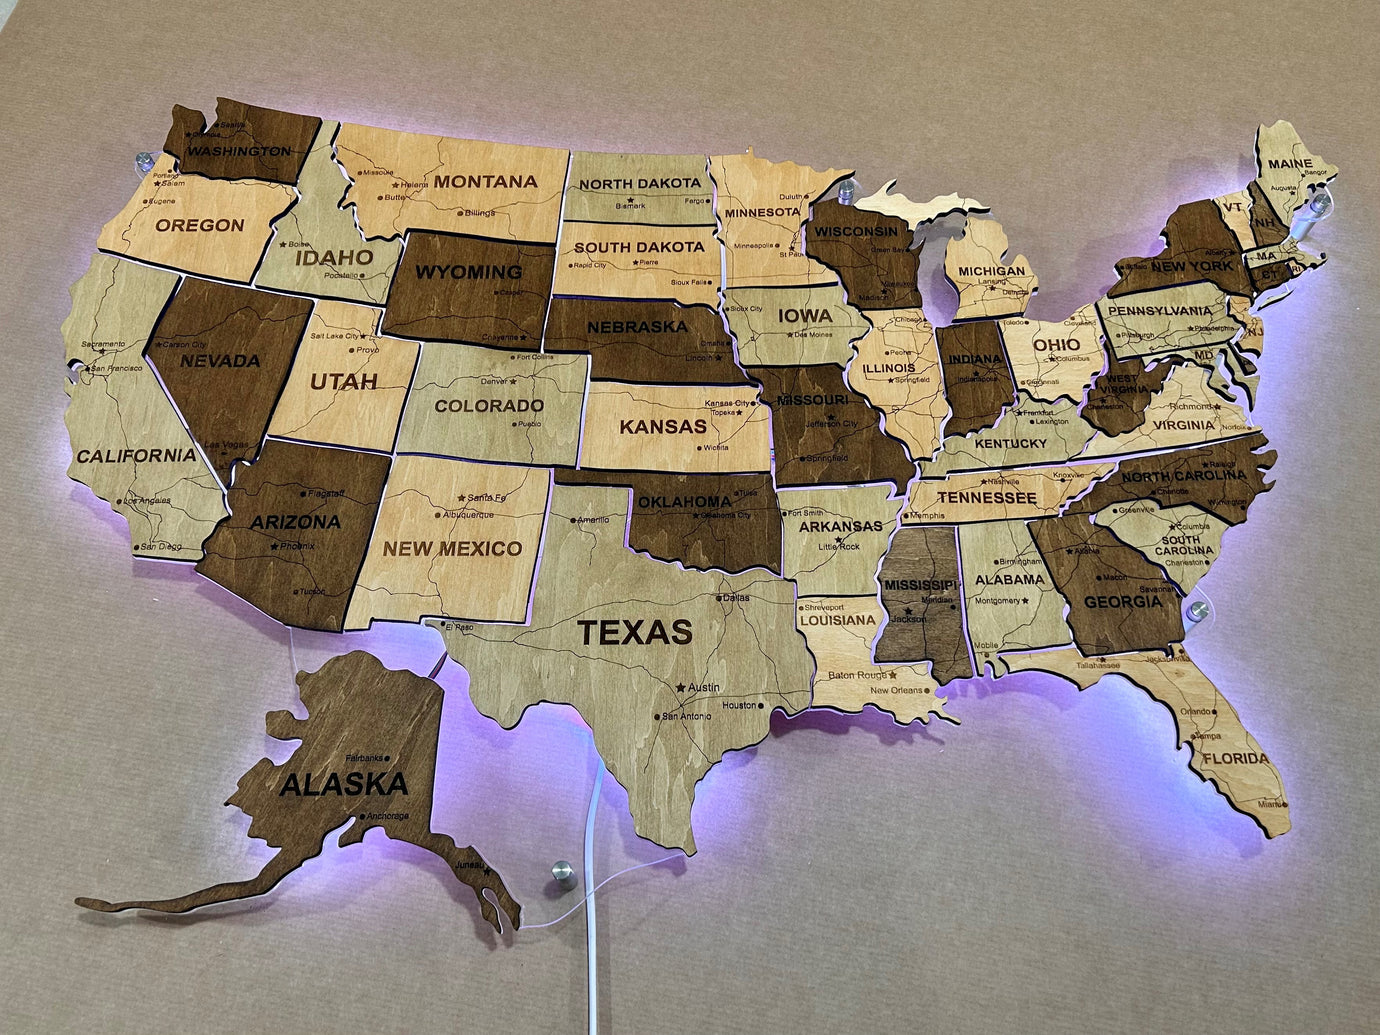 The USA LED RGB map on acrylic glass with roads and backlighting between states color Memphis